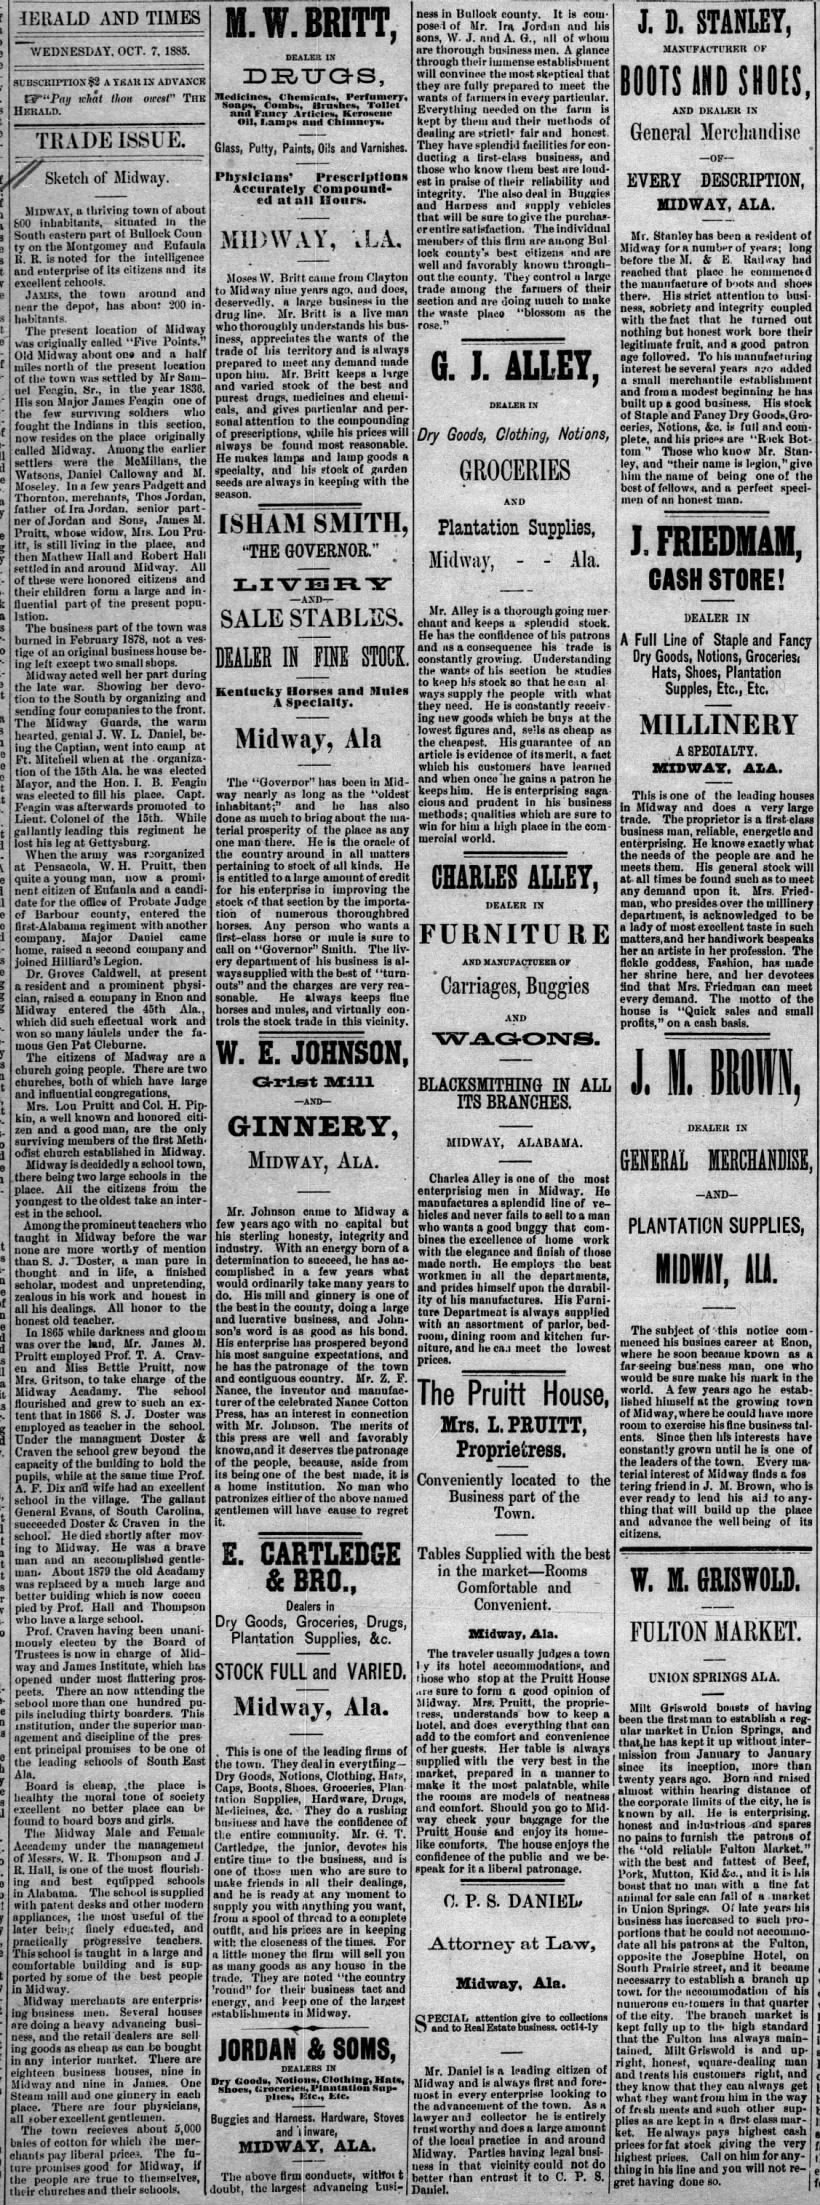 1885 Oct. Newspaper page with 'Sketch of Midway', plus Advertisements.